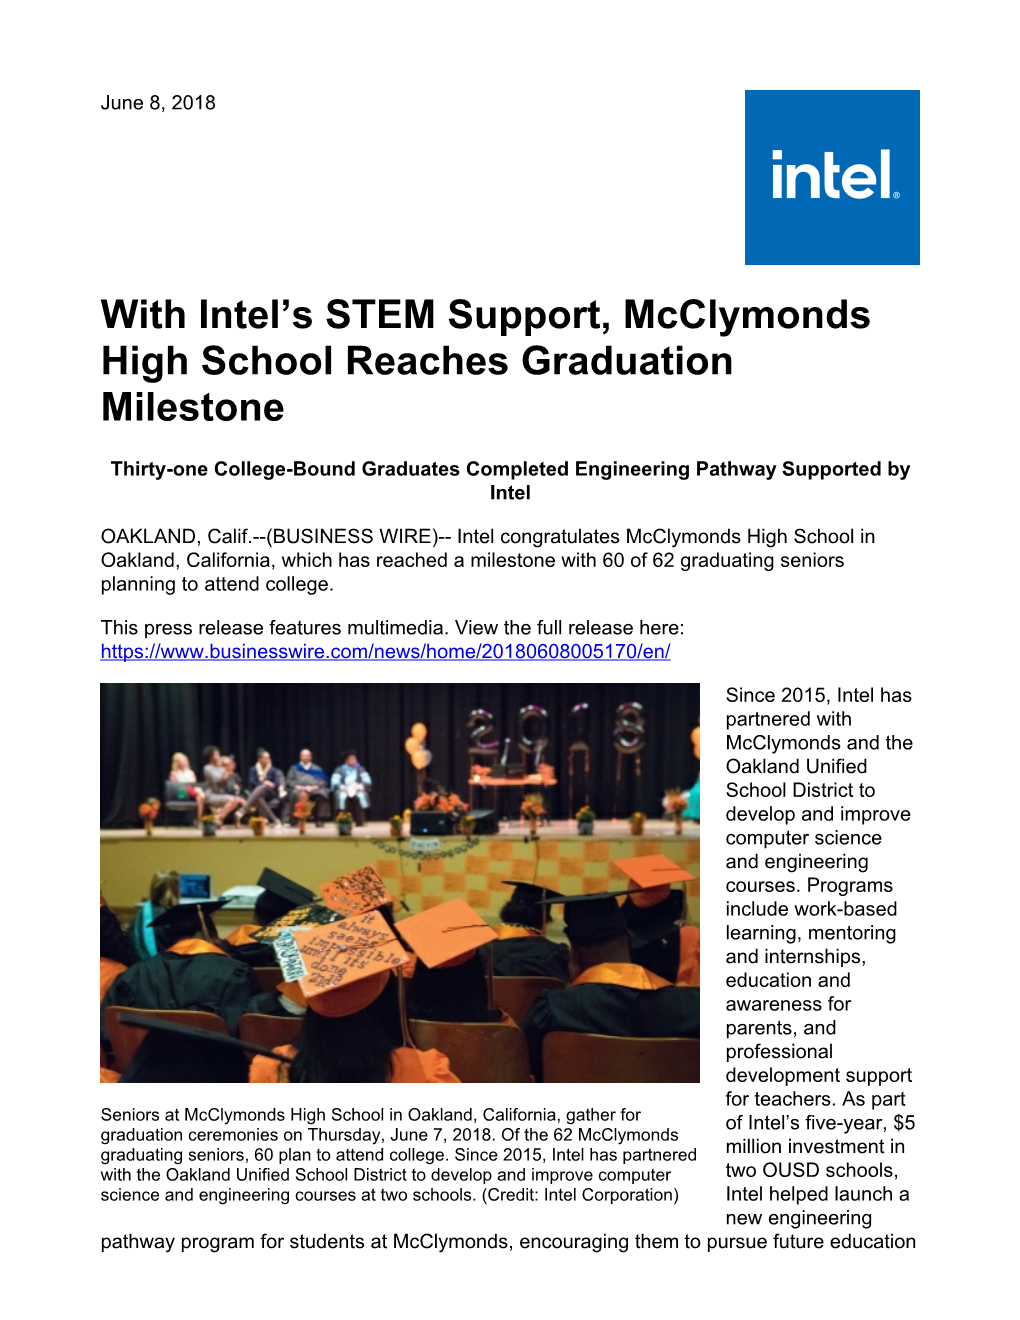 With Intel's STEM Support, Mcclymonds High School Reaches